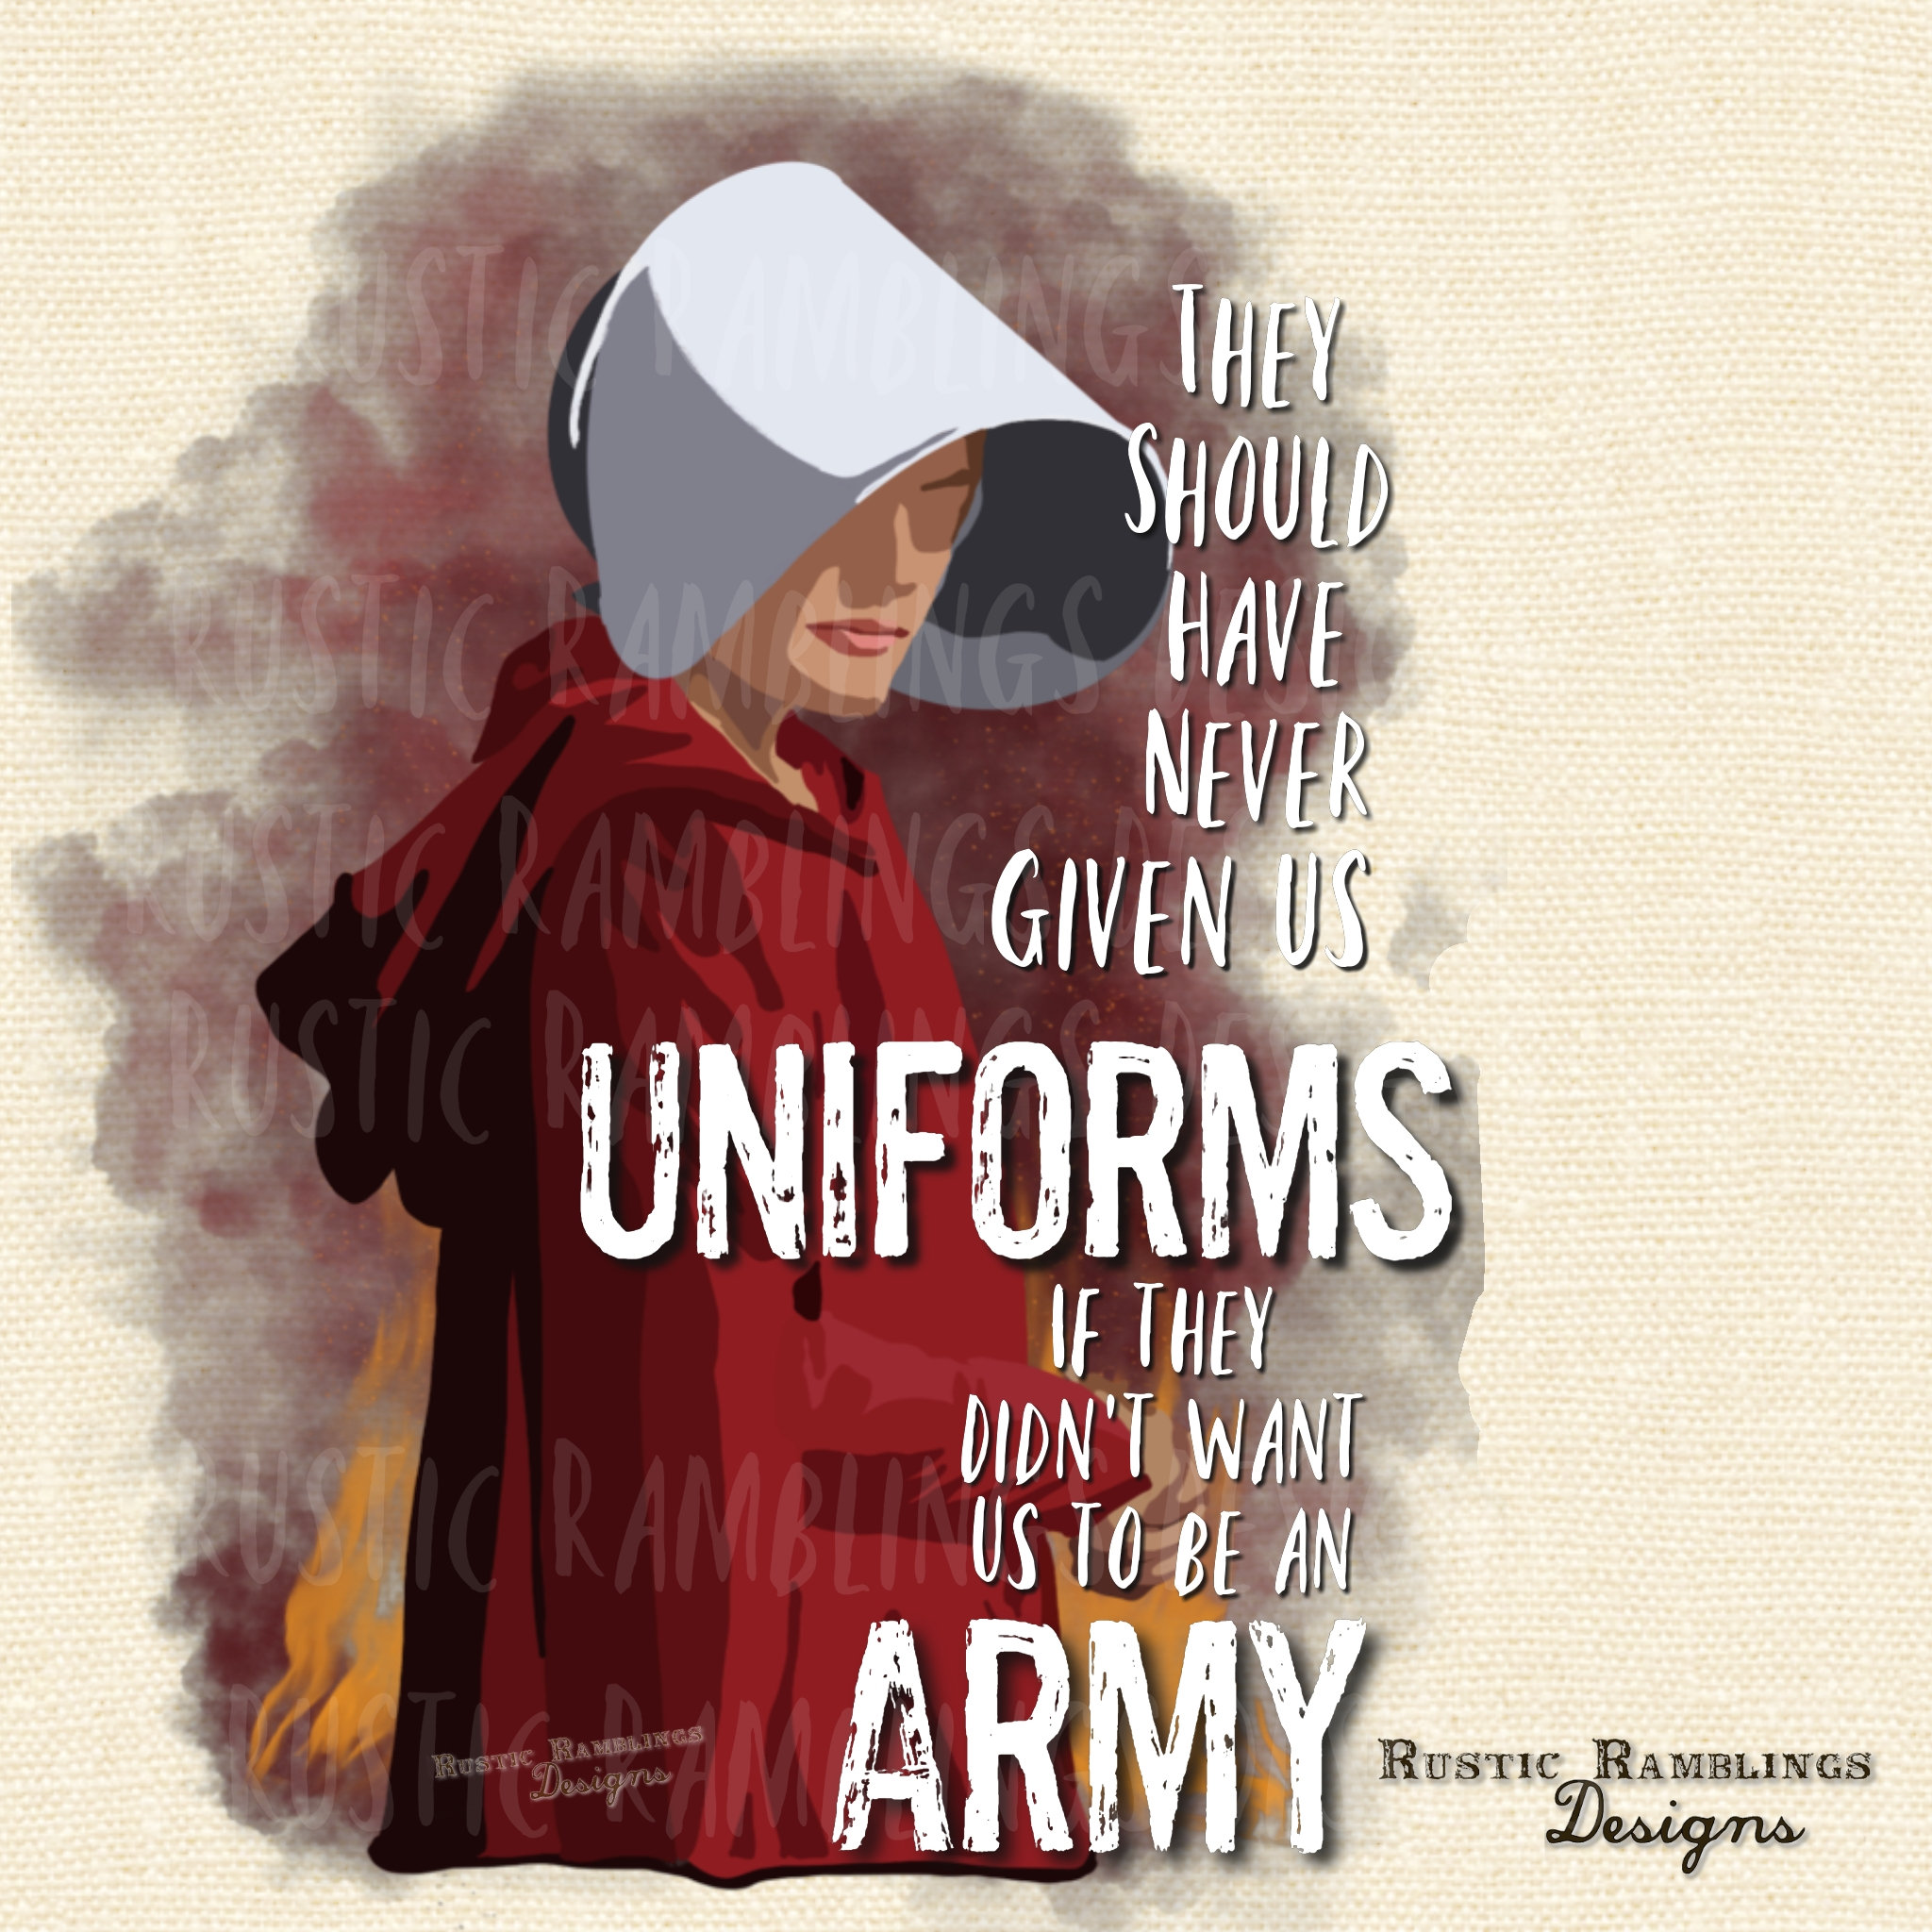 The Handmaids Tale Shirt. They Never Should Have Given Us Uniforms If They  Didn't Want Us to Be an Army. Atwood, Women's Rights & Bonus PIN -   Canada